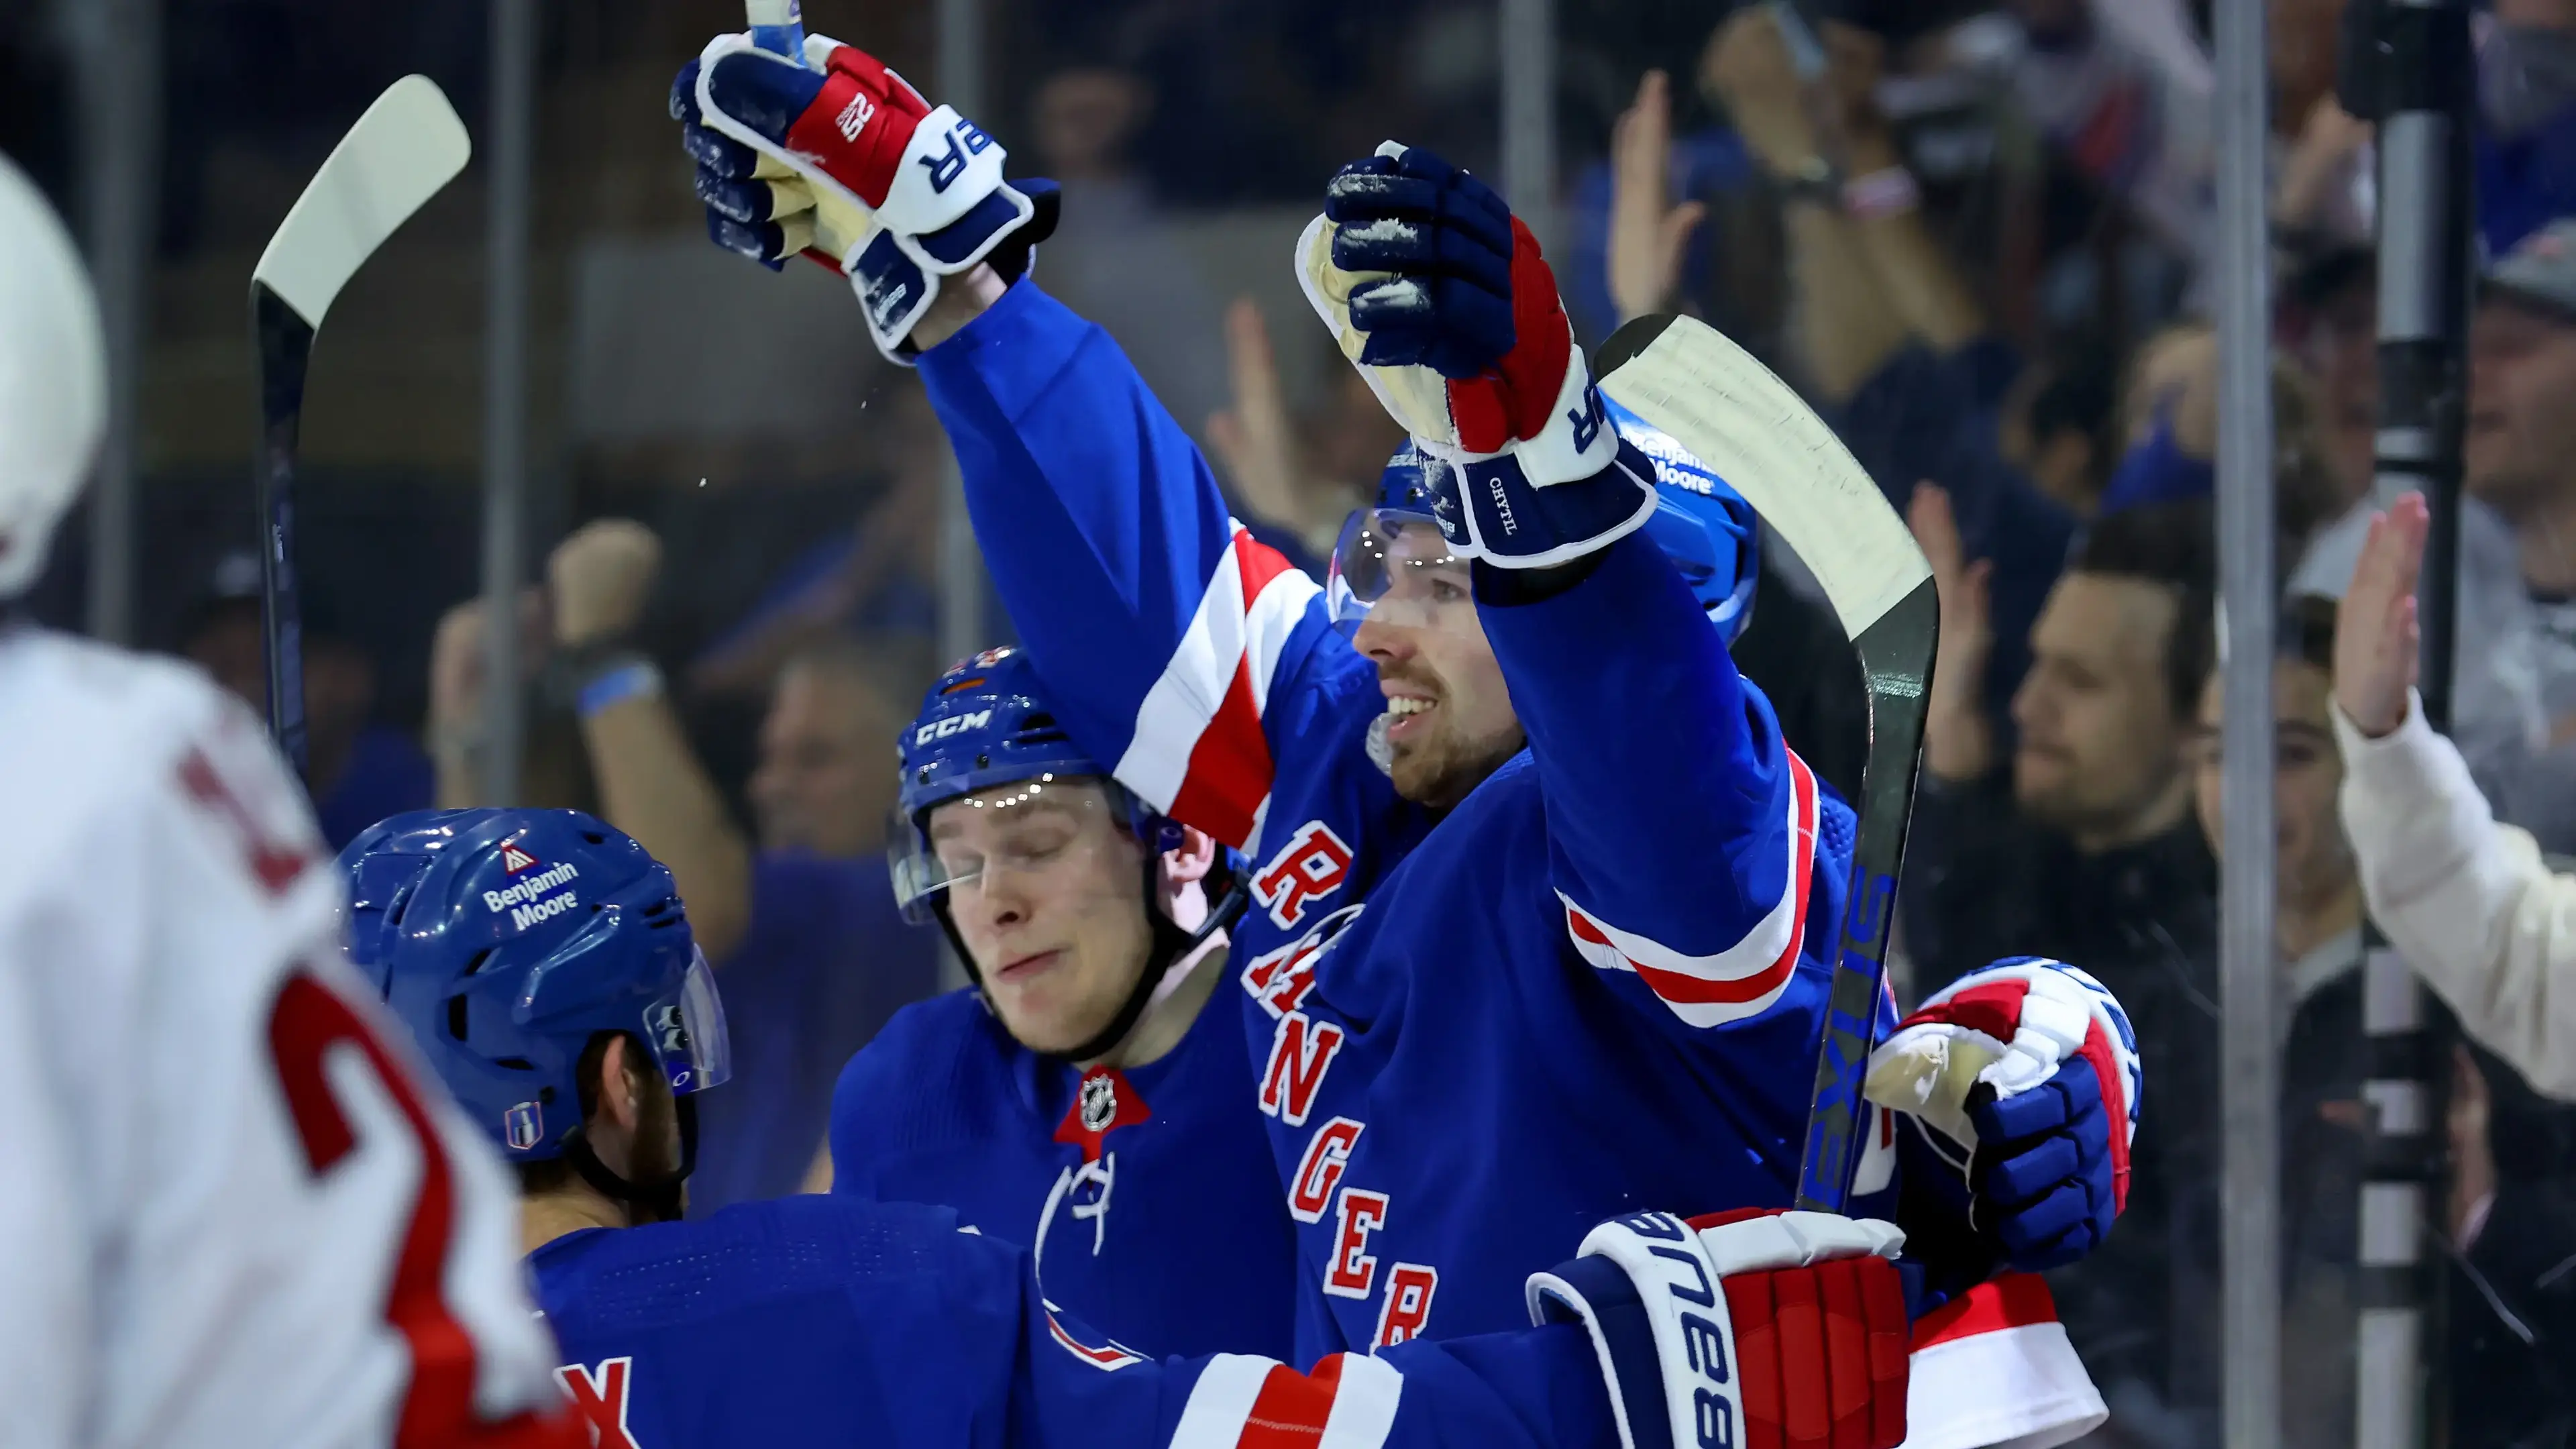 May 28, 2022; New York, New York, USA; New York Rangers center Filip Chytil (72) celebrates his goal against the Carolina Hurricanes with defenseman Adam Fox (23) and right wing Kaapo Kakko (24) during the second period of game six of the second round of the 2022 Stanley Cup Playoffs at Madison Square Garden. Mandatory Credit: Brad Penner-USA TODAY Sports / Brad Penner-USA TODAY Sports